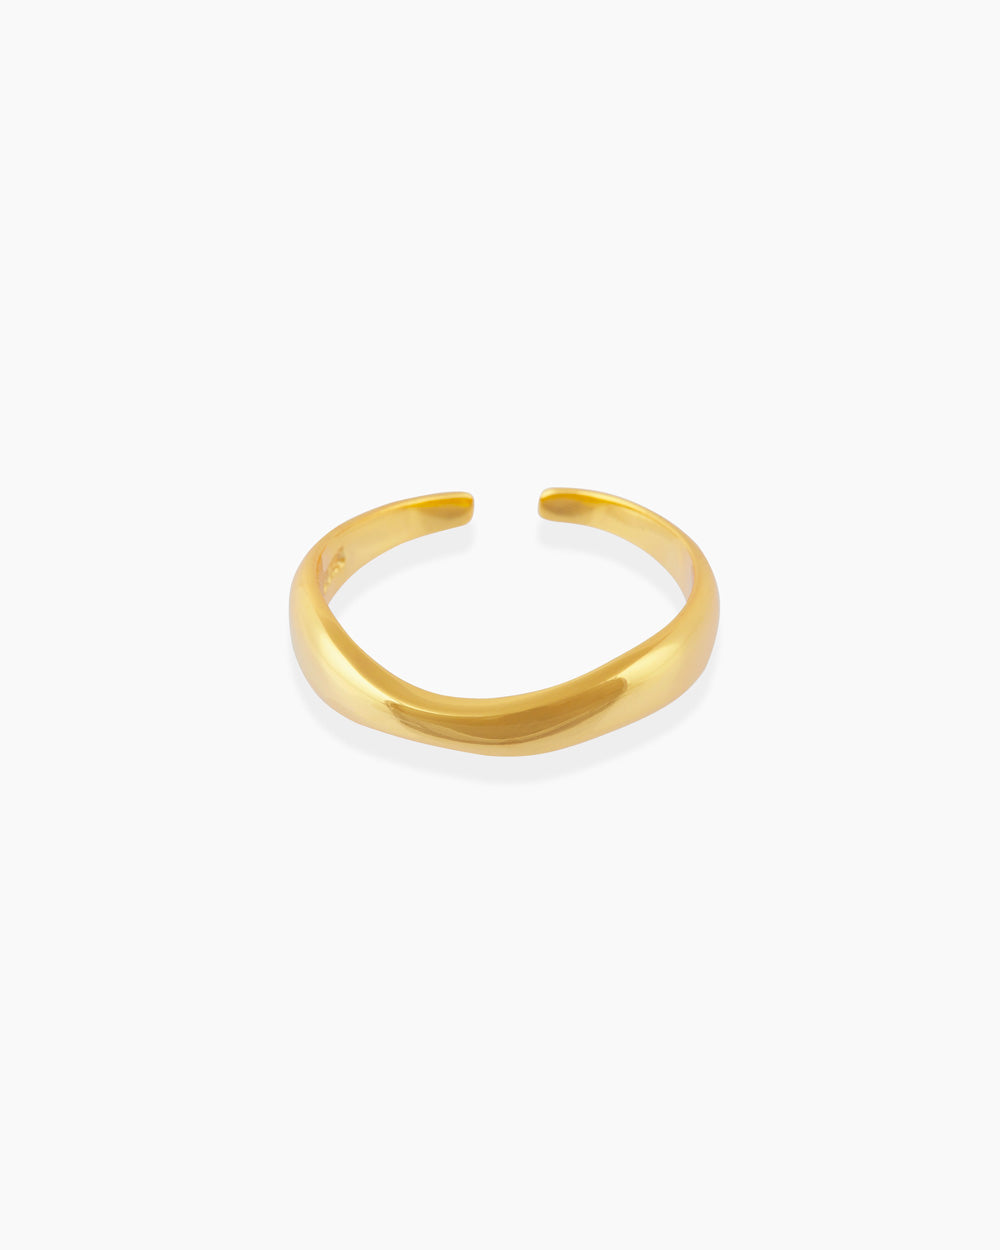 Riley Gold Ring - Penny Pairs